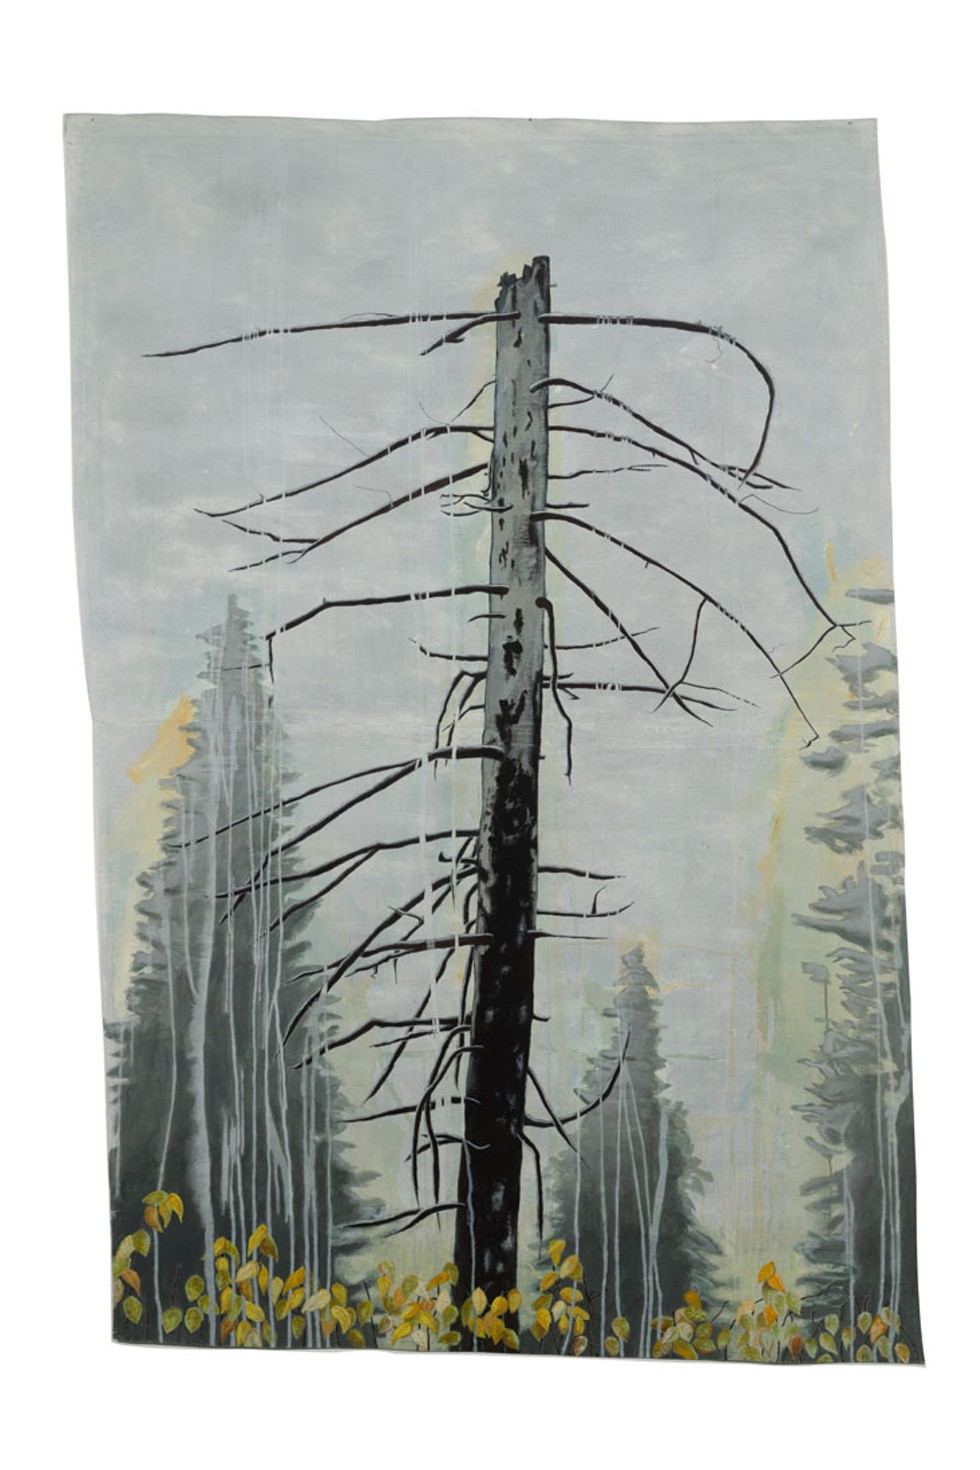 Image of "Vertebrae Mt. Spokane, WA", 2019, Acrylic paint on old canvas drop cloths, 57 x 86 inches by Kingsley Parker